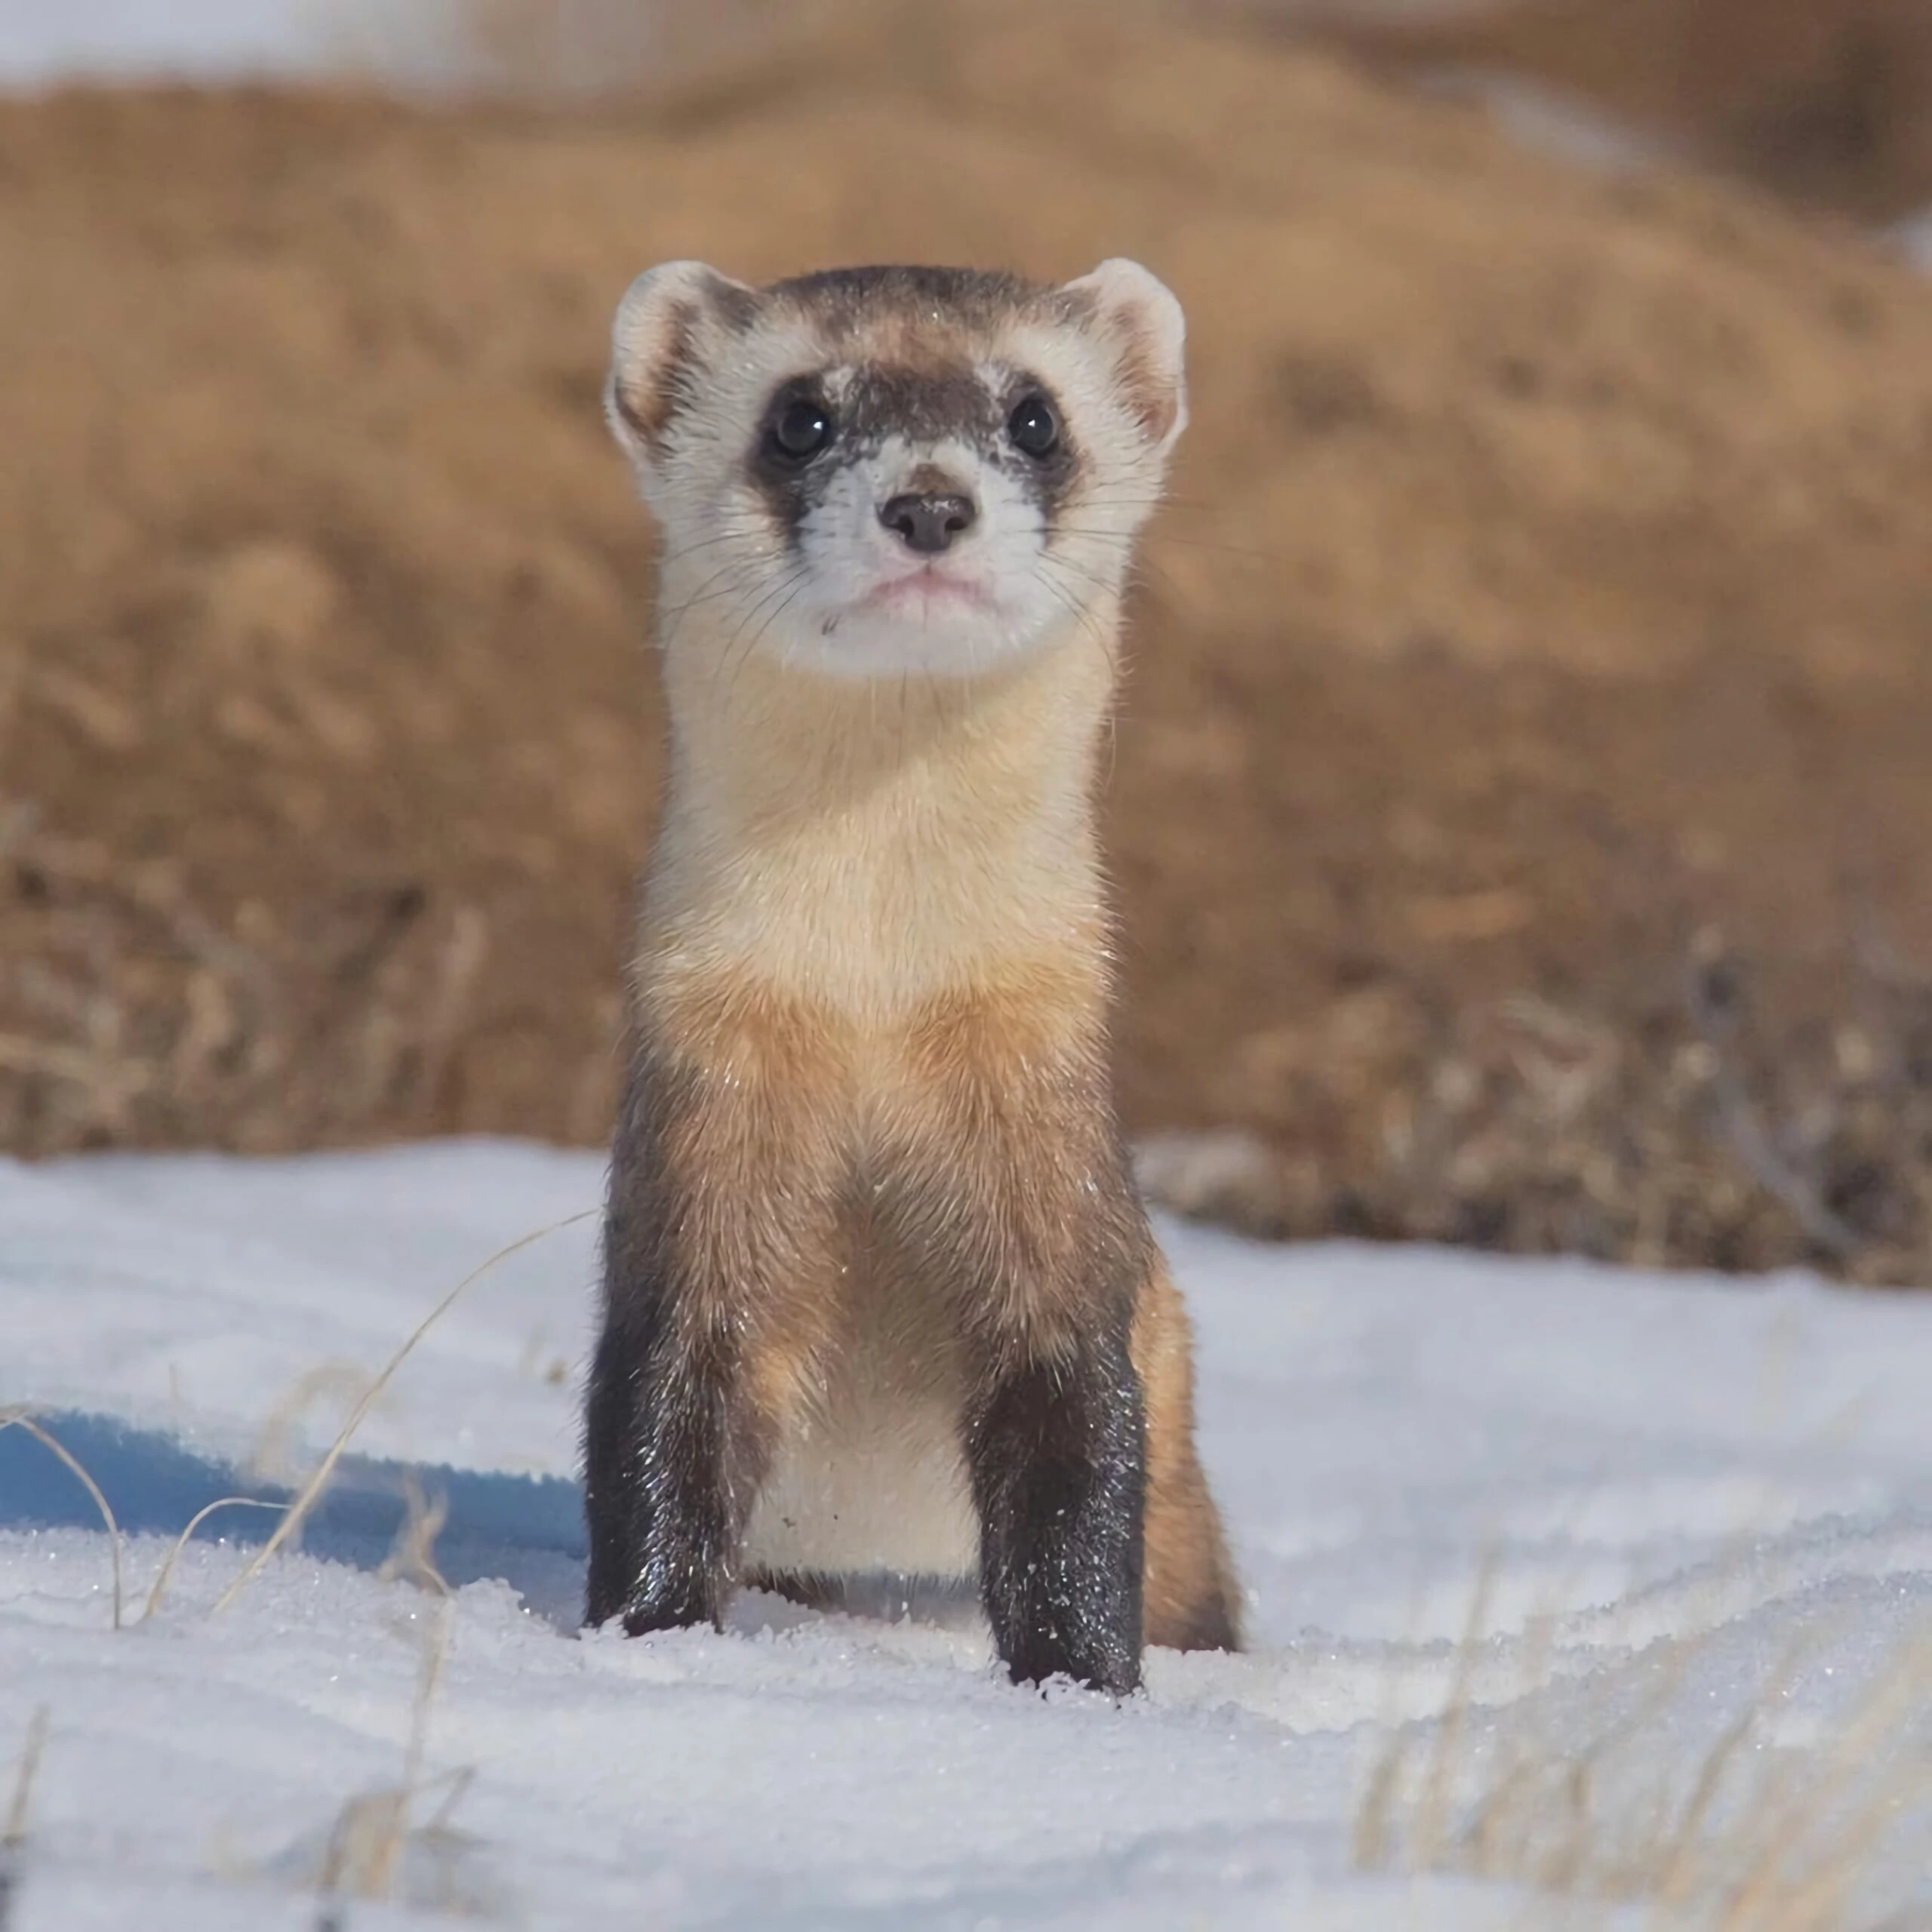 Weasel in snow by Rohan Chang from Unsplash directory